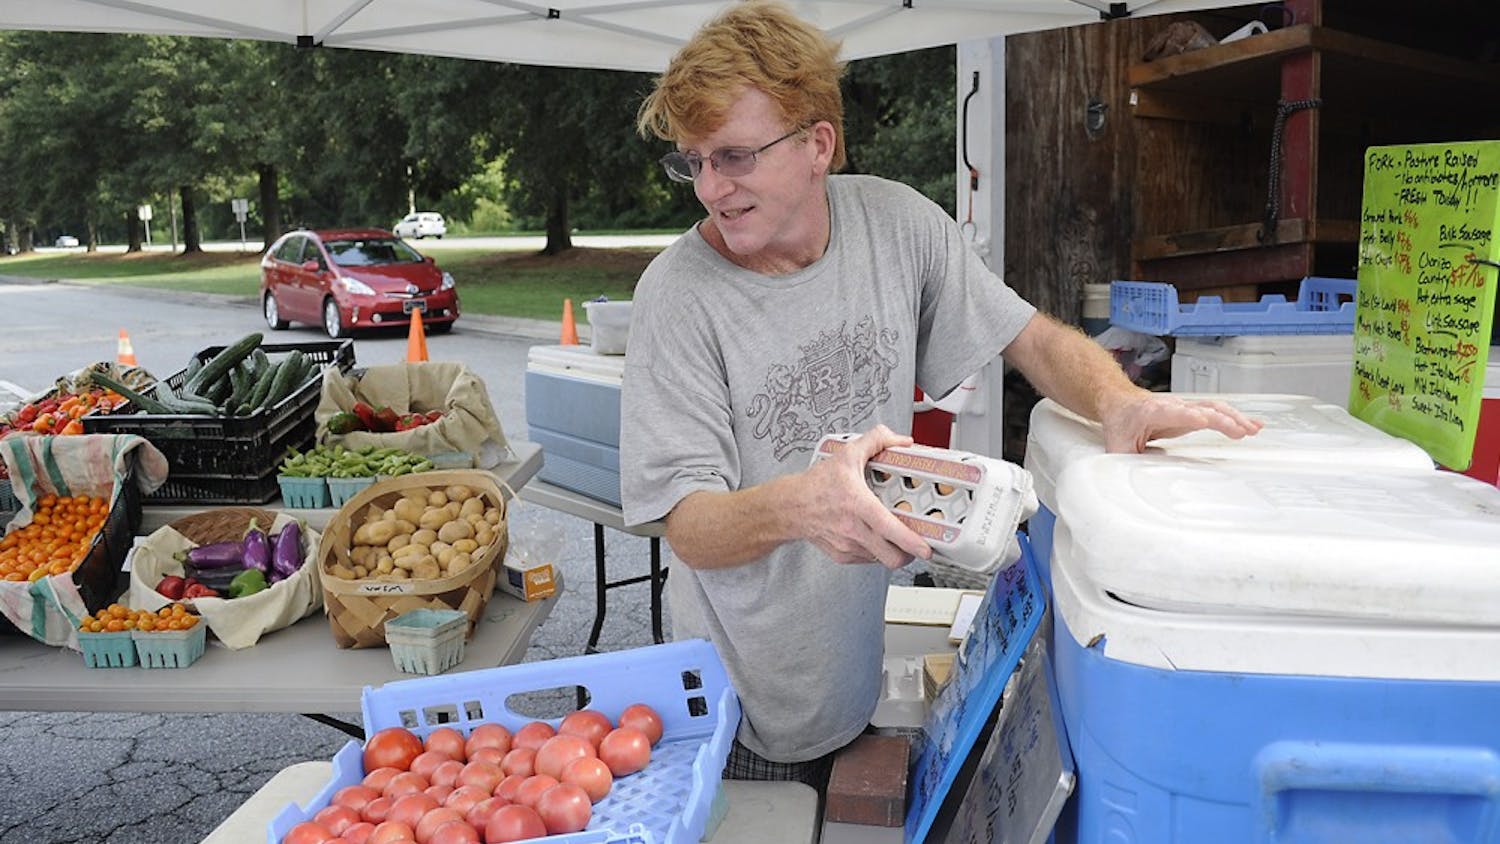 Ben Bergmann, a farmer from Fickle Creek Farm, has been a participant of the Chapel Hill Market for 12 years.   Taking place in the parking lot of University Mall, the market is has moved its location several times.  With the prospect of having a permanent home, Bergman says, "I wish it could be here permanently but it's a little tenuous to be honest.  It would be nice if we had a longer term commitment from the mall."